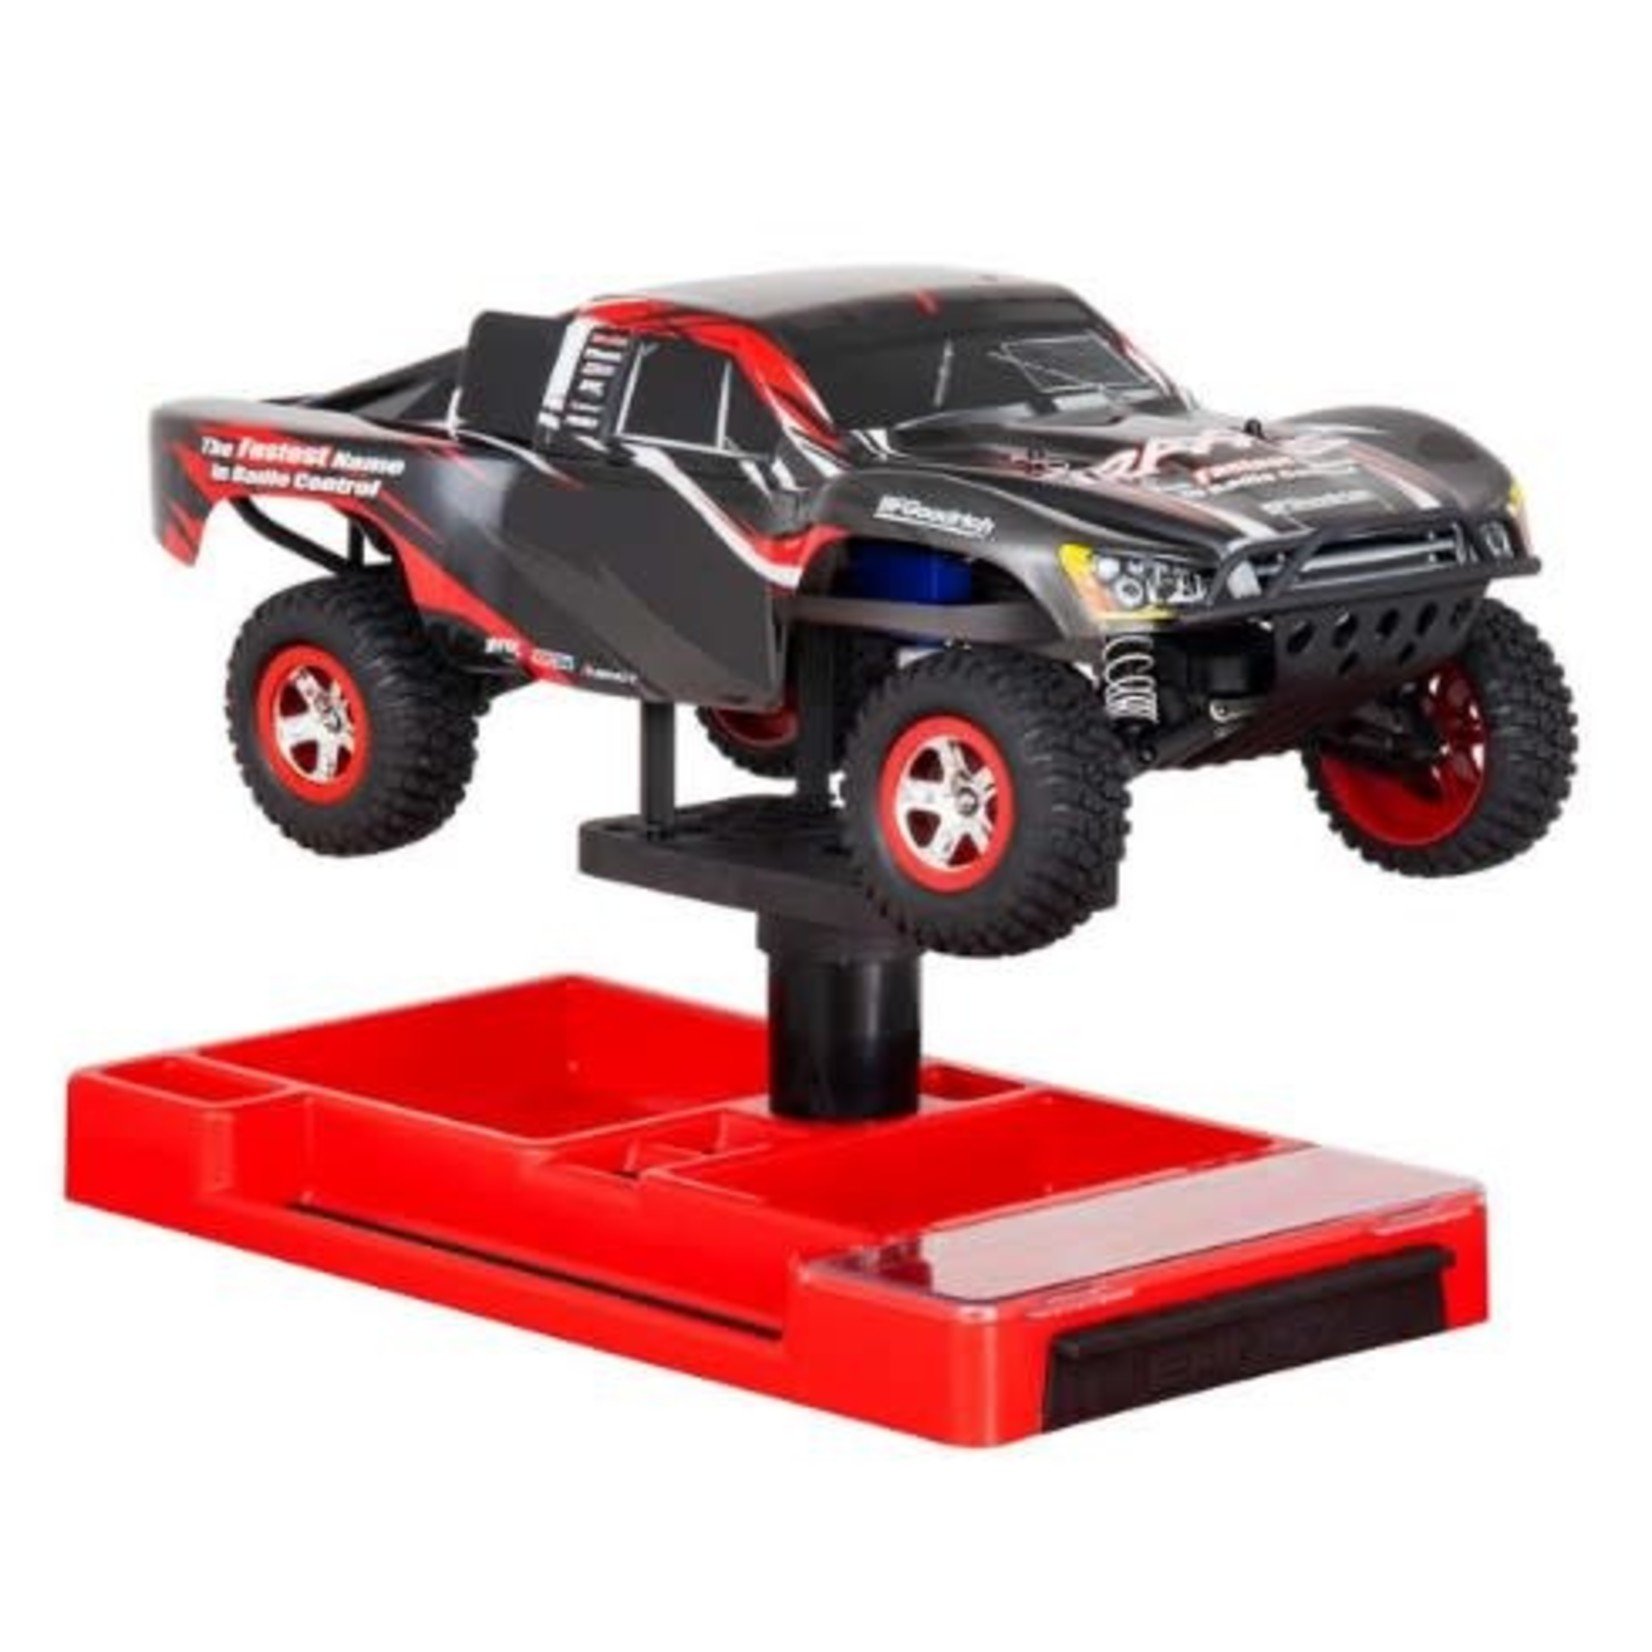 Ernst Ultimate Hobby Stand (Red/Black)